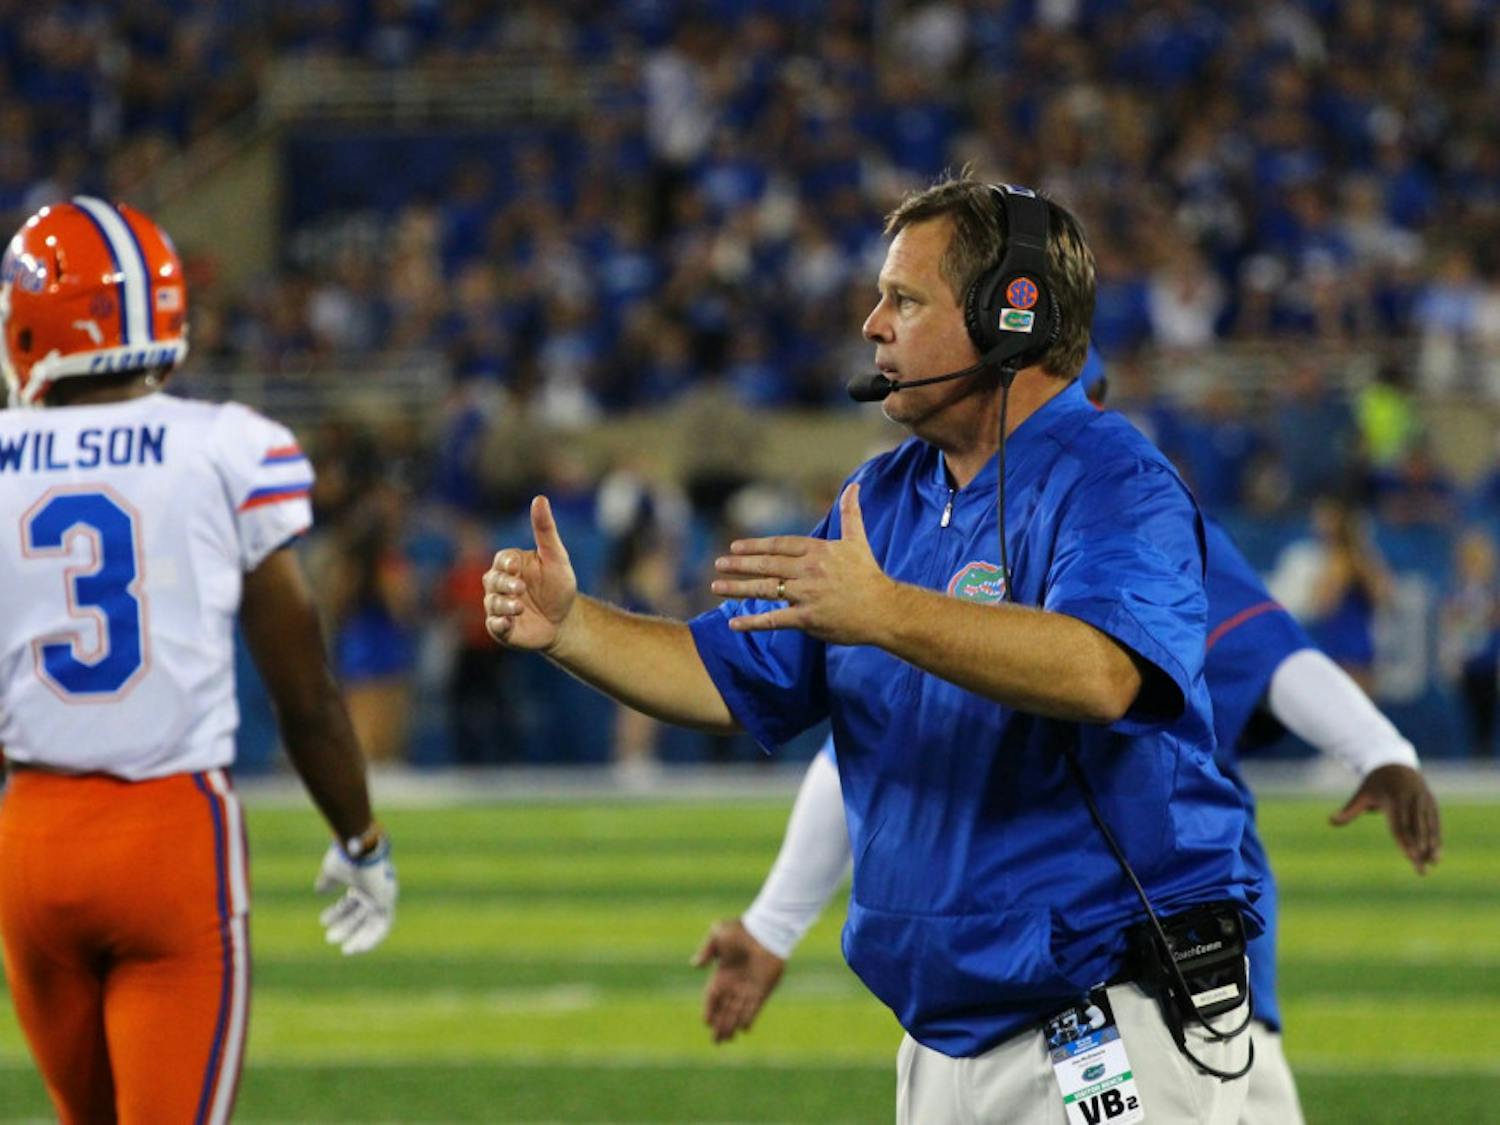 UF coach Jim McElwain motions to the Gators defense during Florida's 28-27 win against Kentucky on Saturday at Kroger Field.